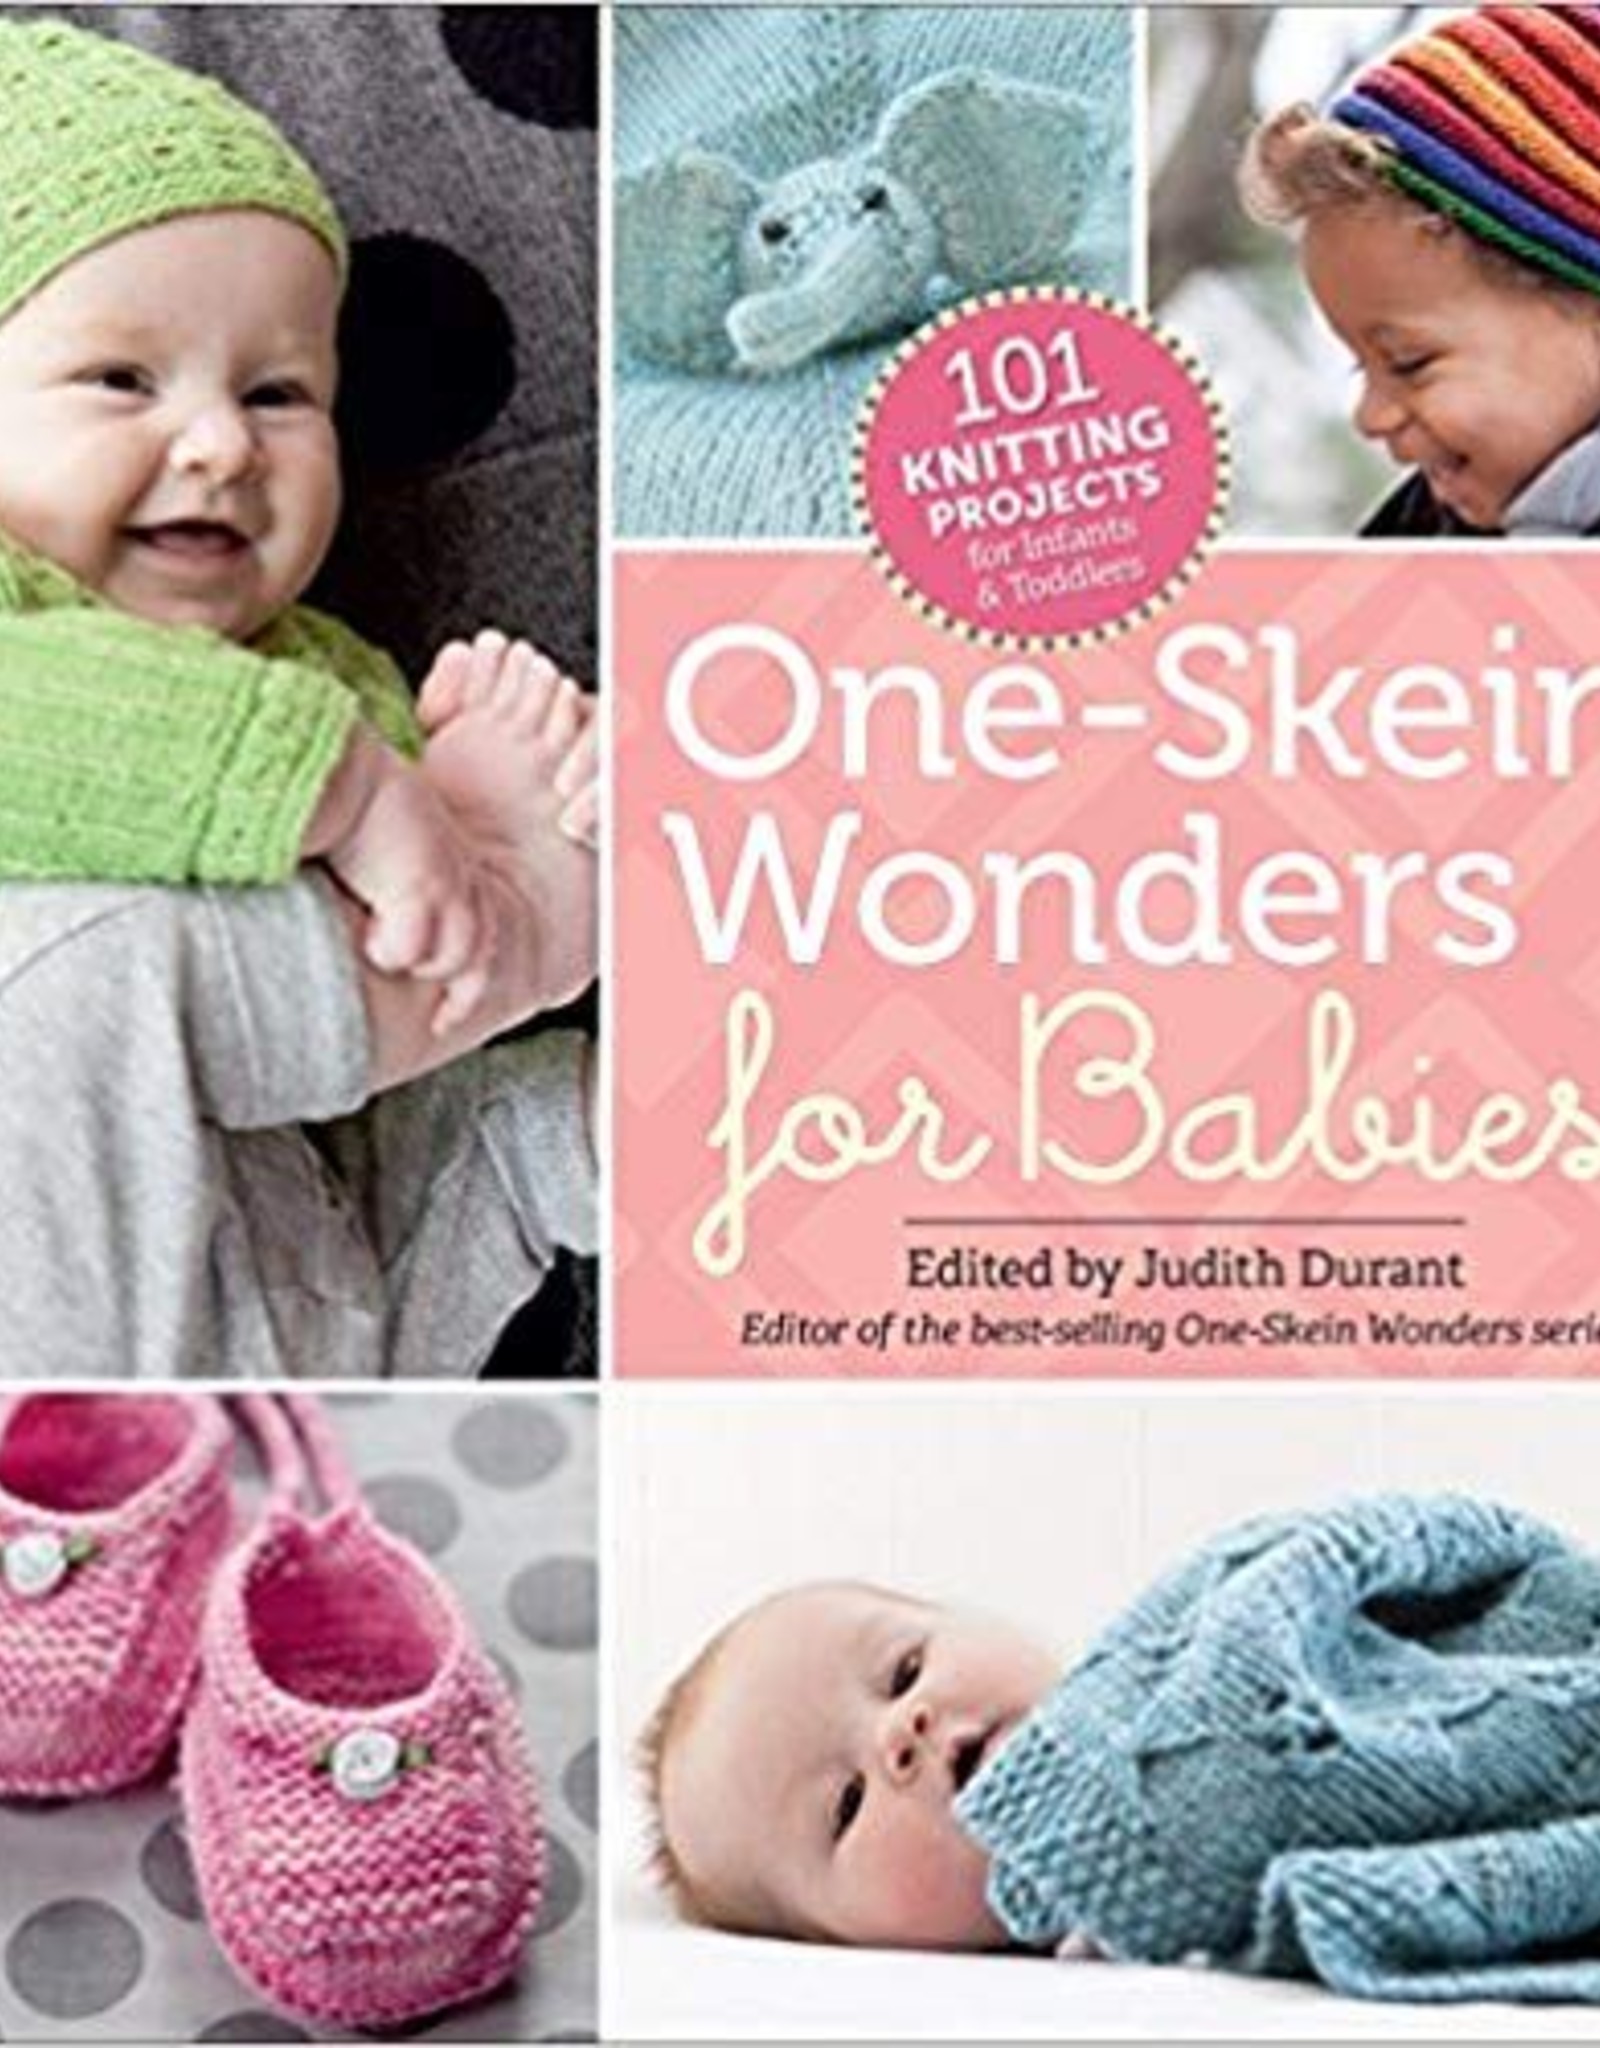 One-Skein Wonders for Babies Edited by Judith Durant